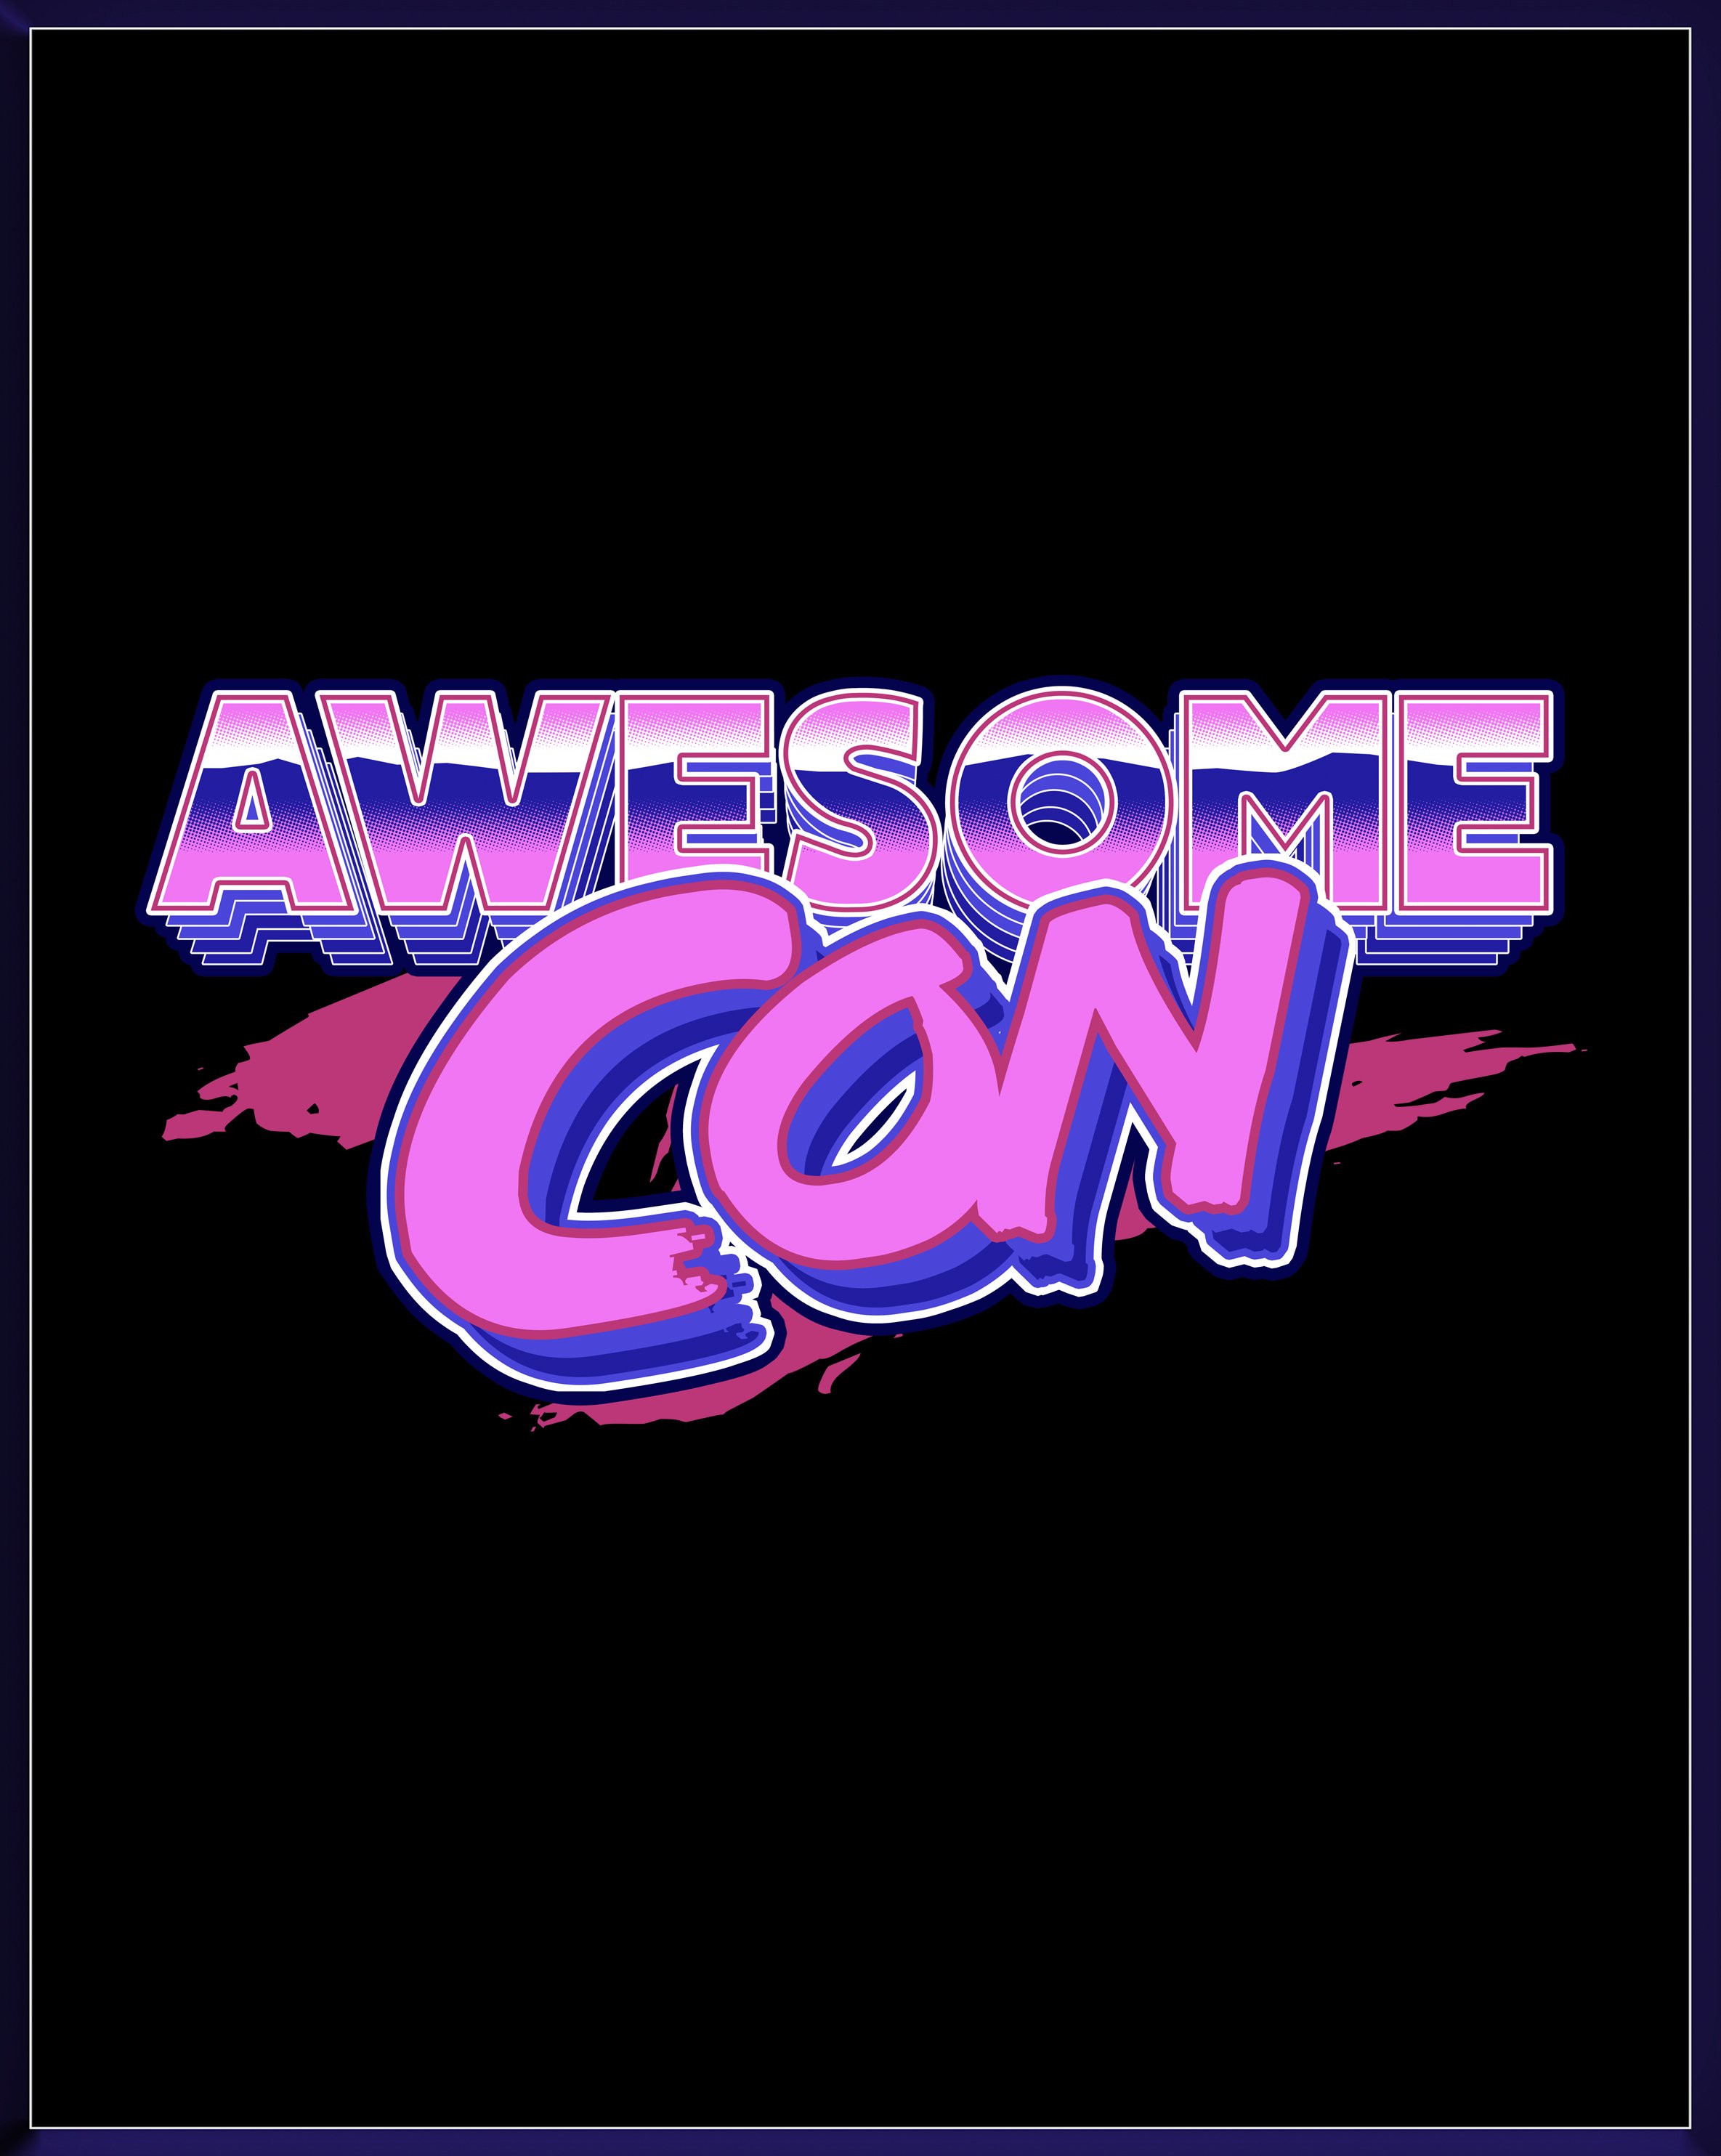 AWESOME CON